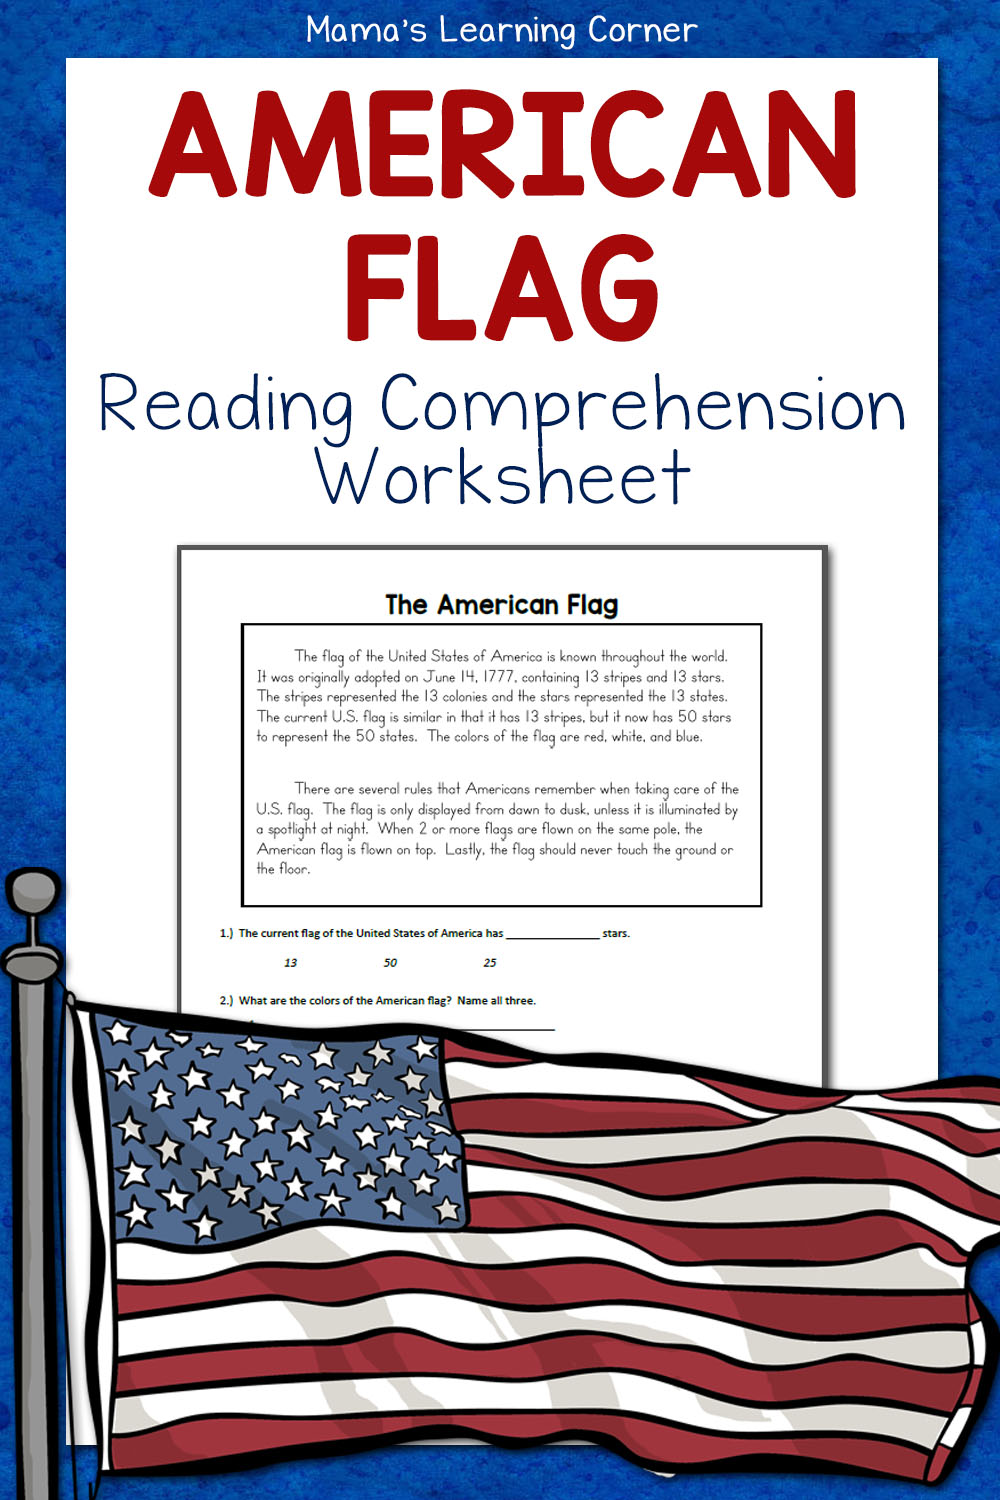 the-american-flag-reading-comprehension-worksheet-mamas-learning-corner